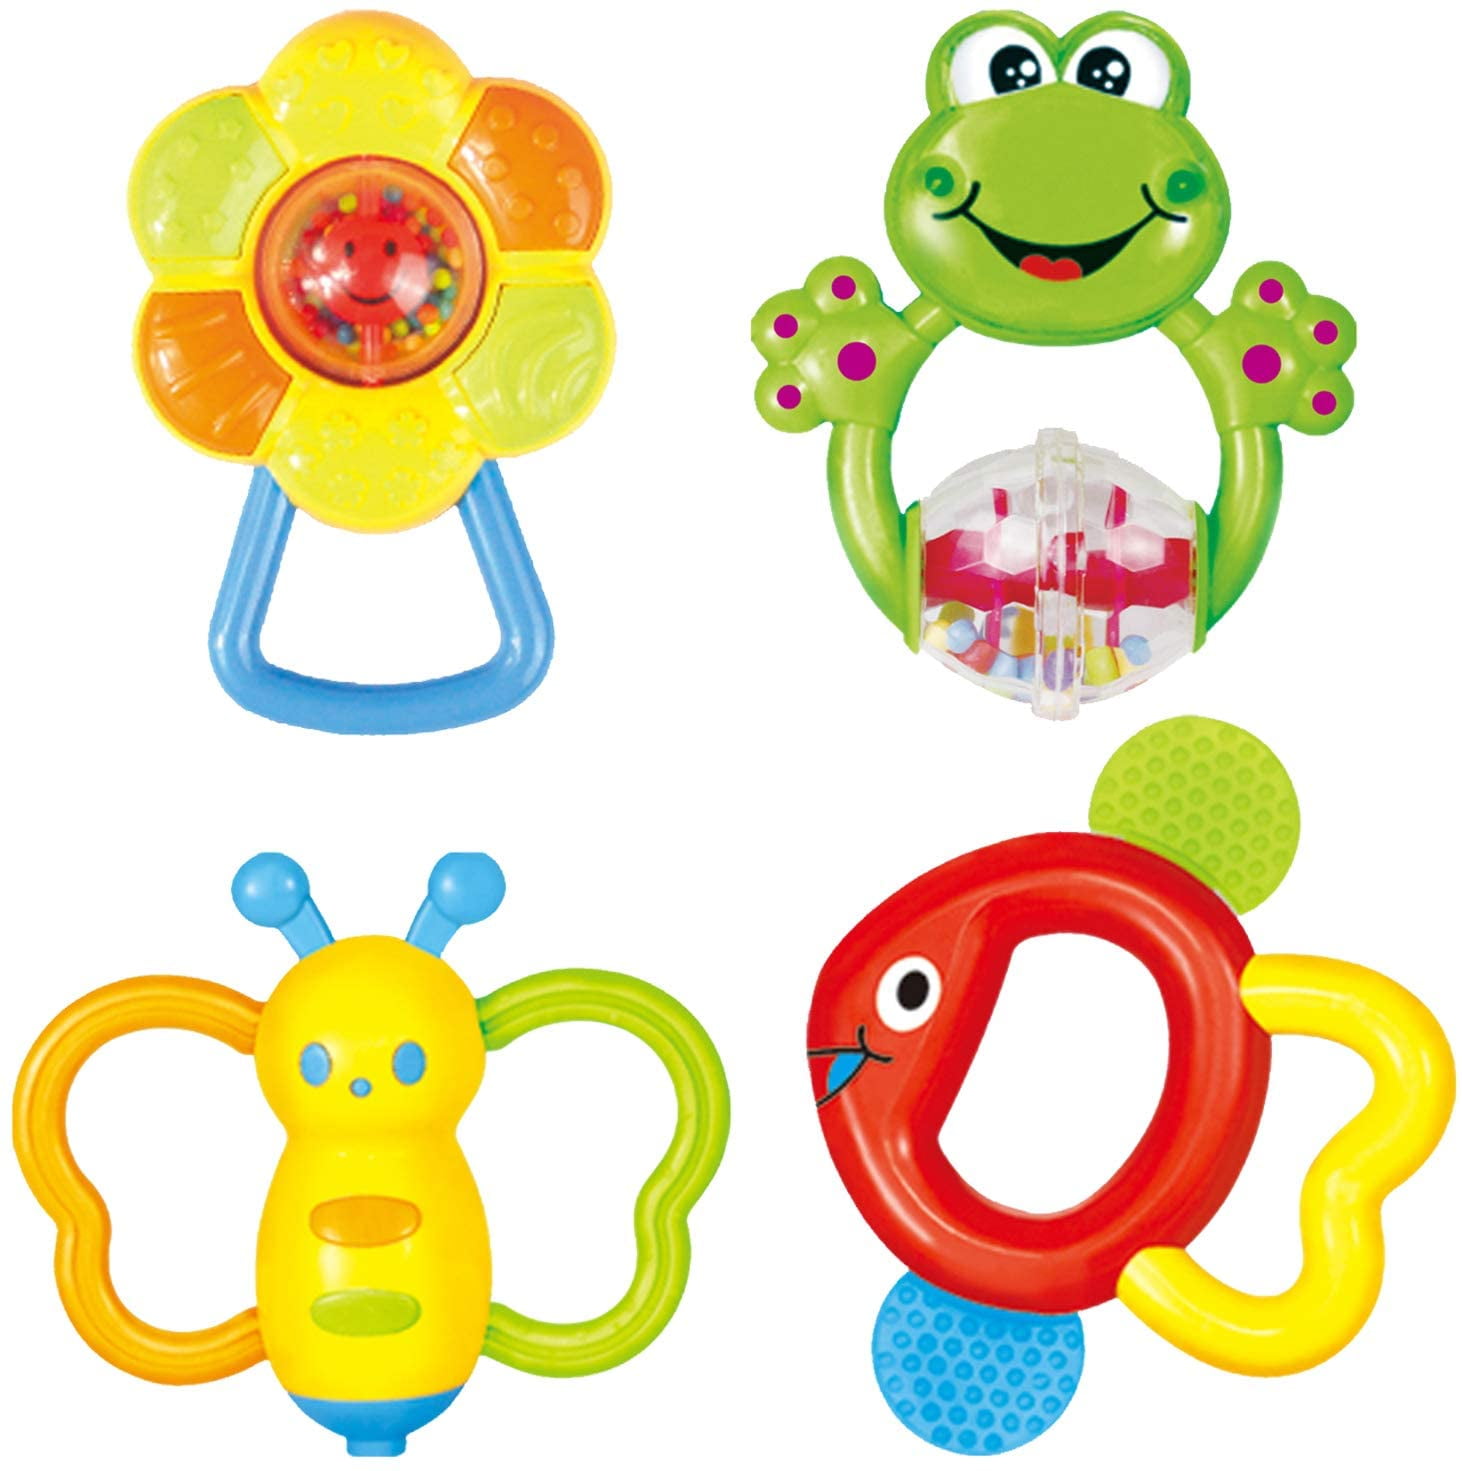 Baby Rattle Ball Toy Colorful Newborn Hand Catch Shaker Bell Ring Teether Toy 